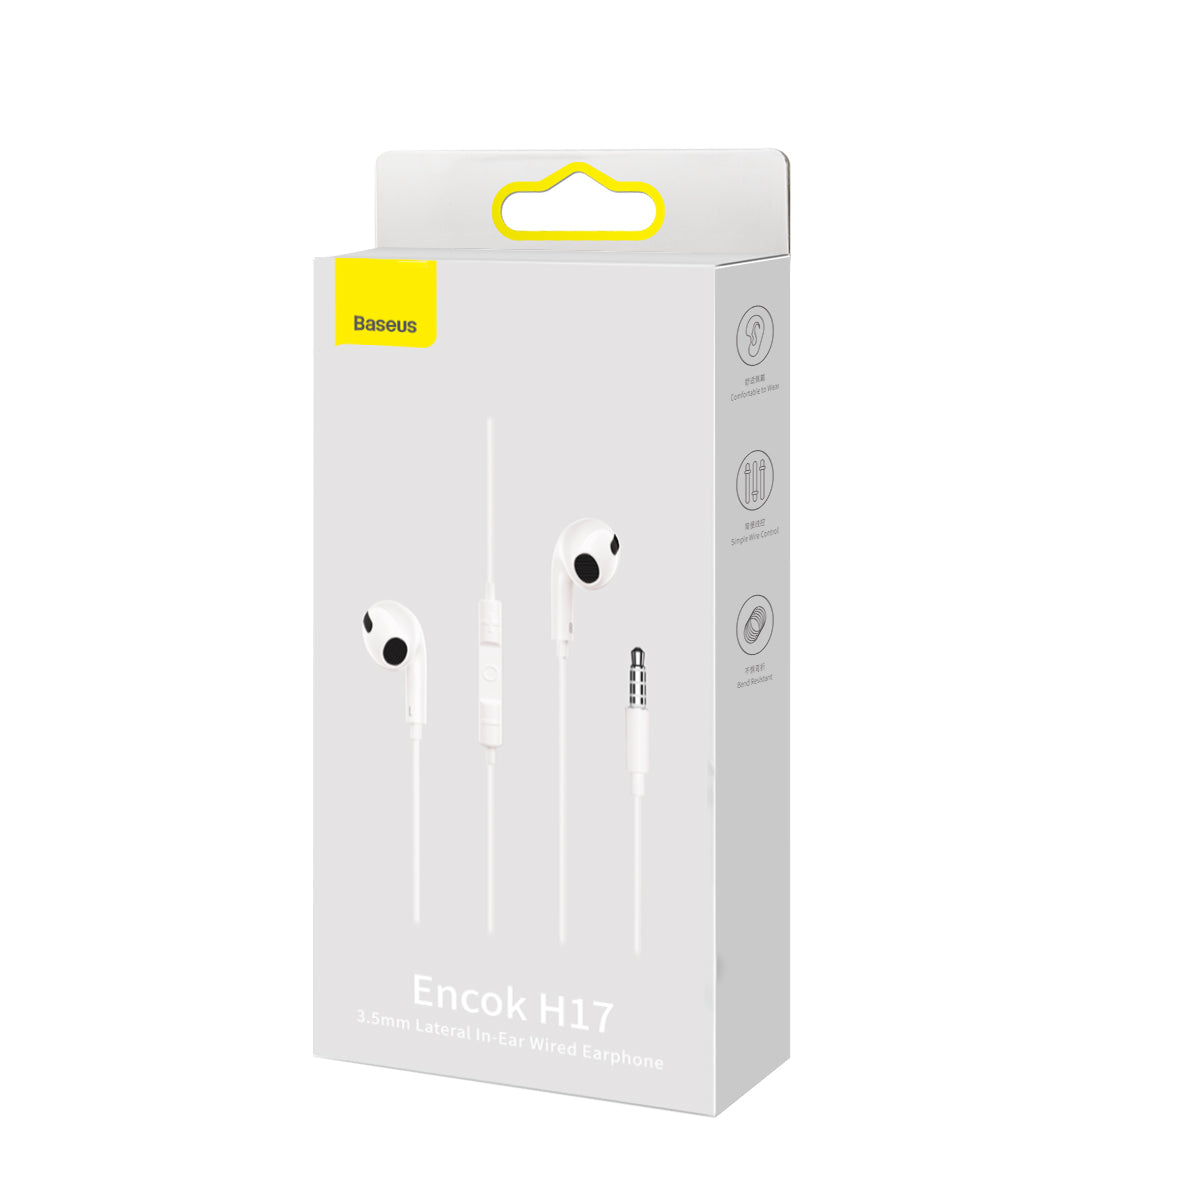 Baseus Encok H17 3.5mm lateral in-Ear Wired Earphone White